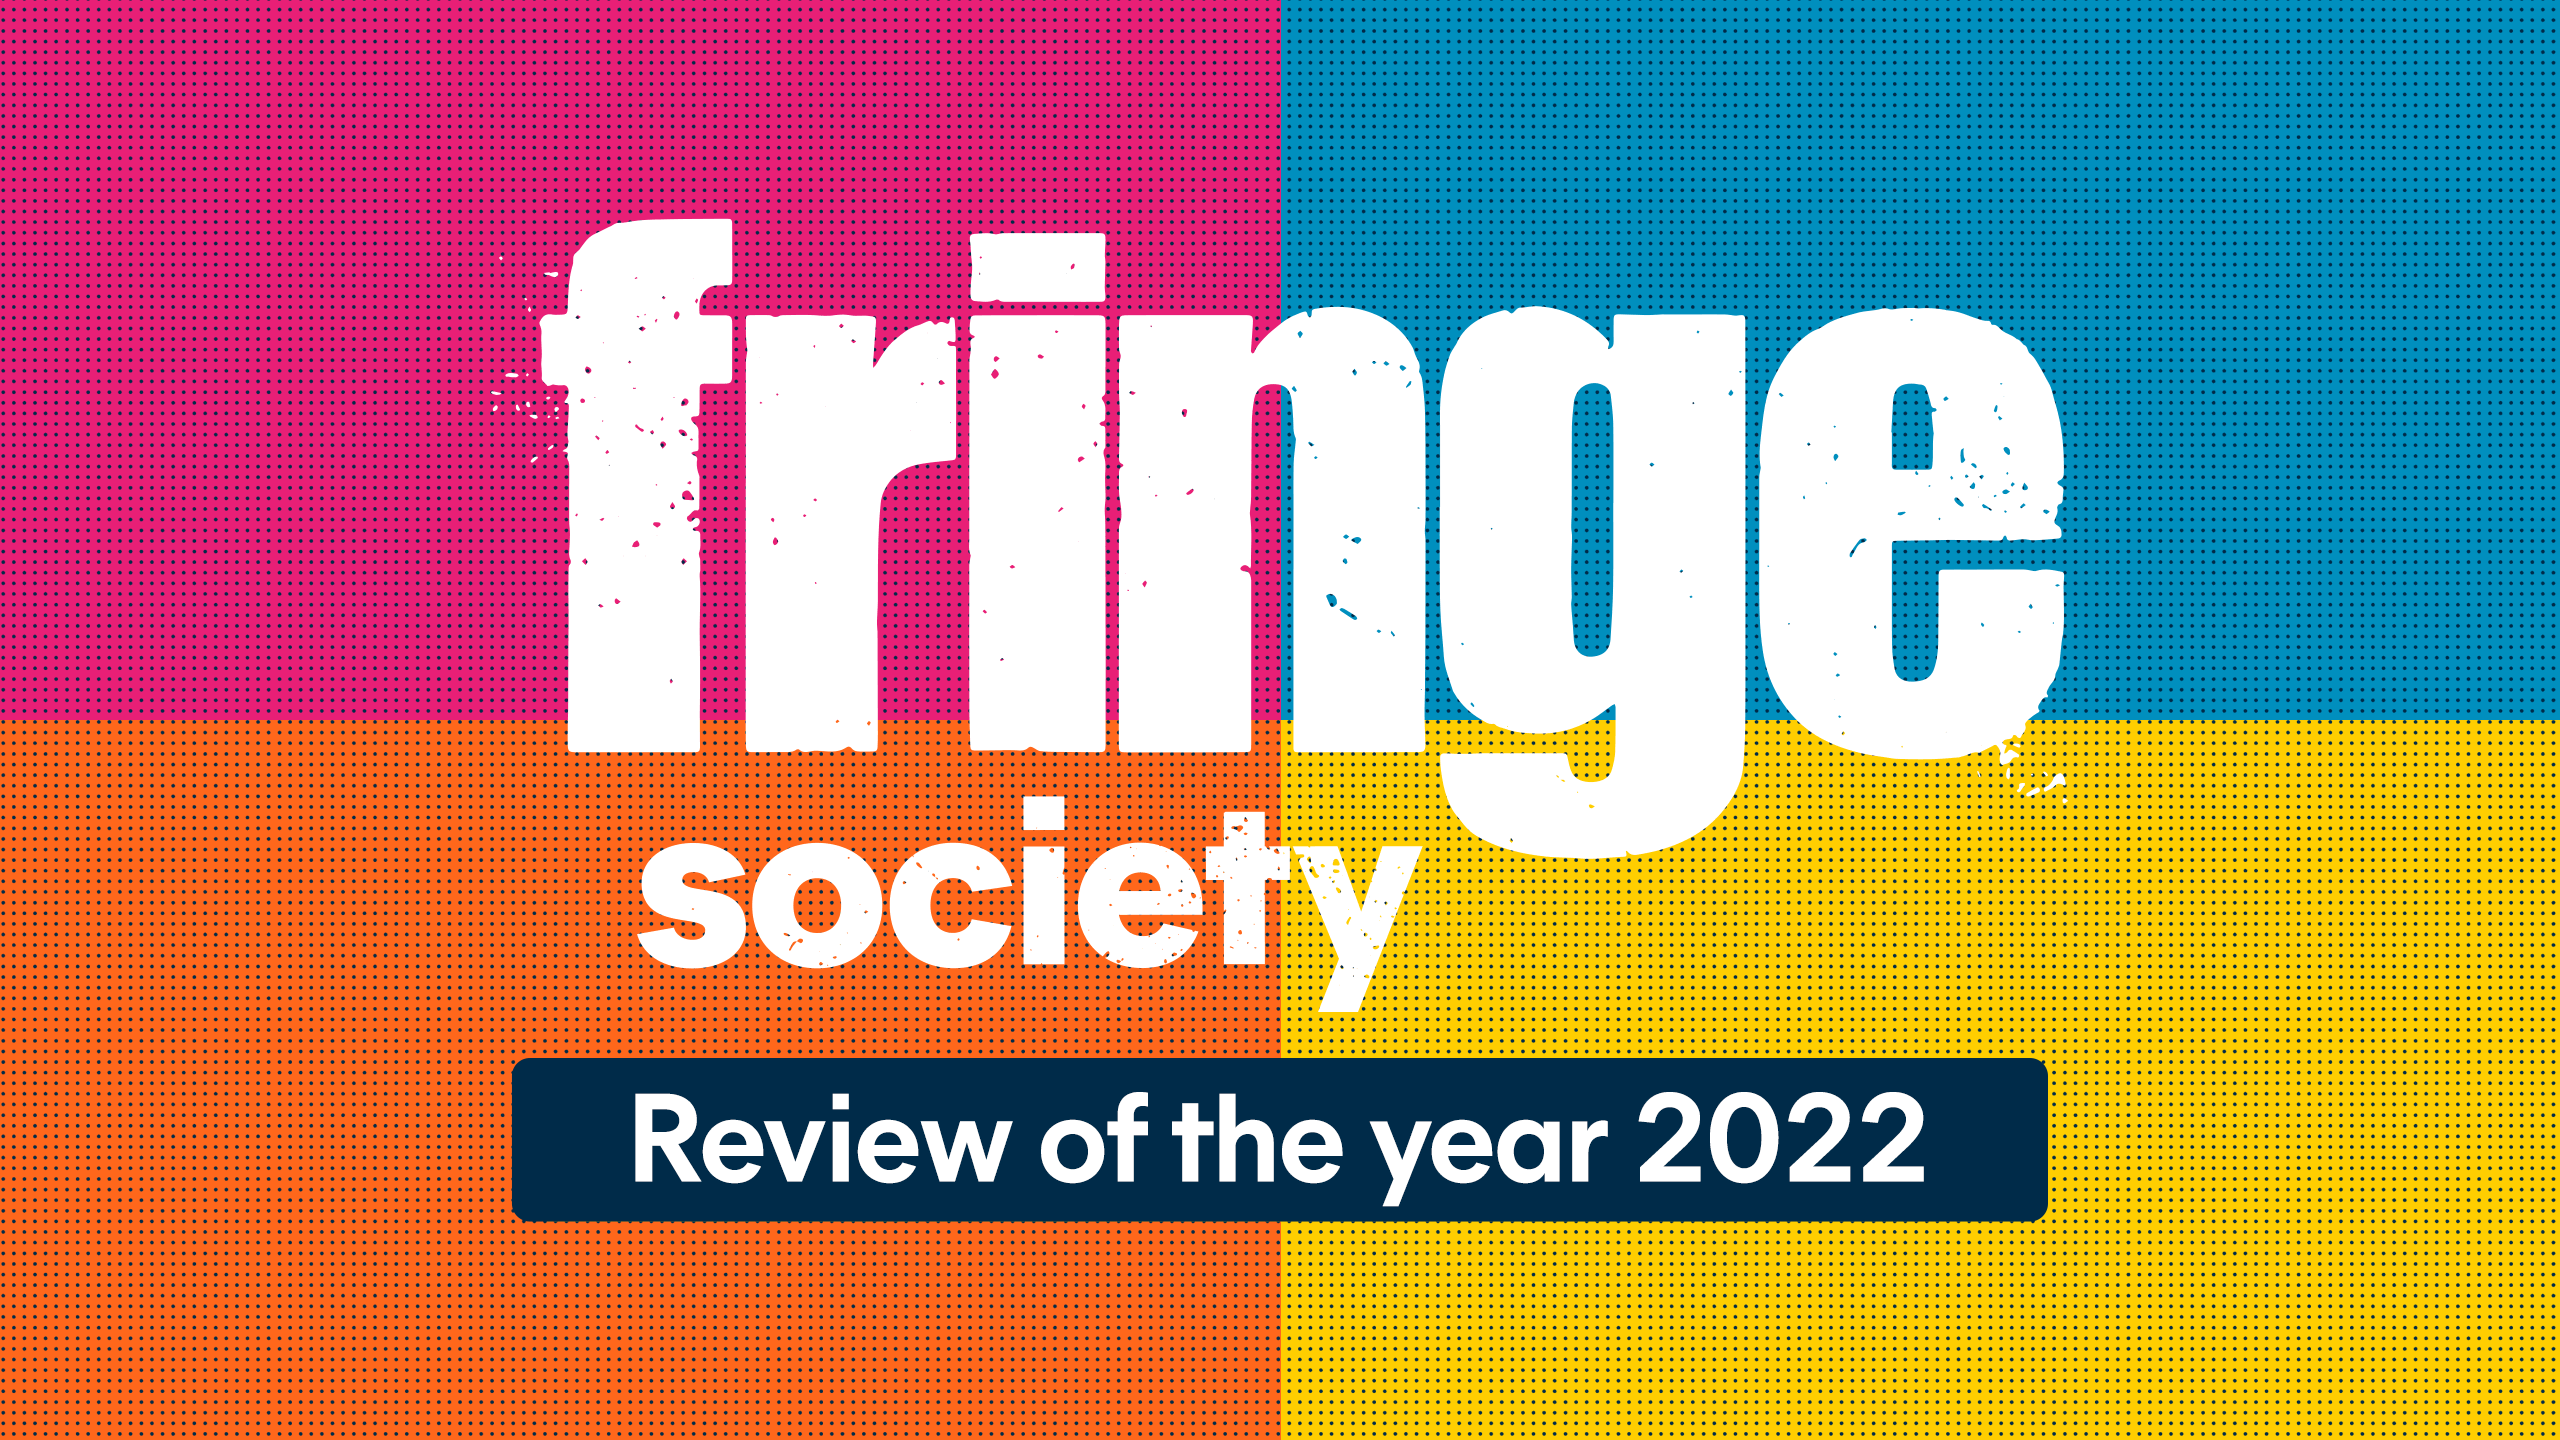 Fringe Society: Review of the year 2022